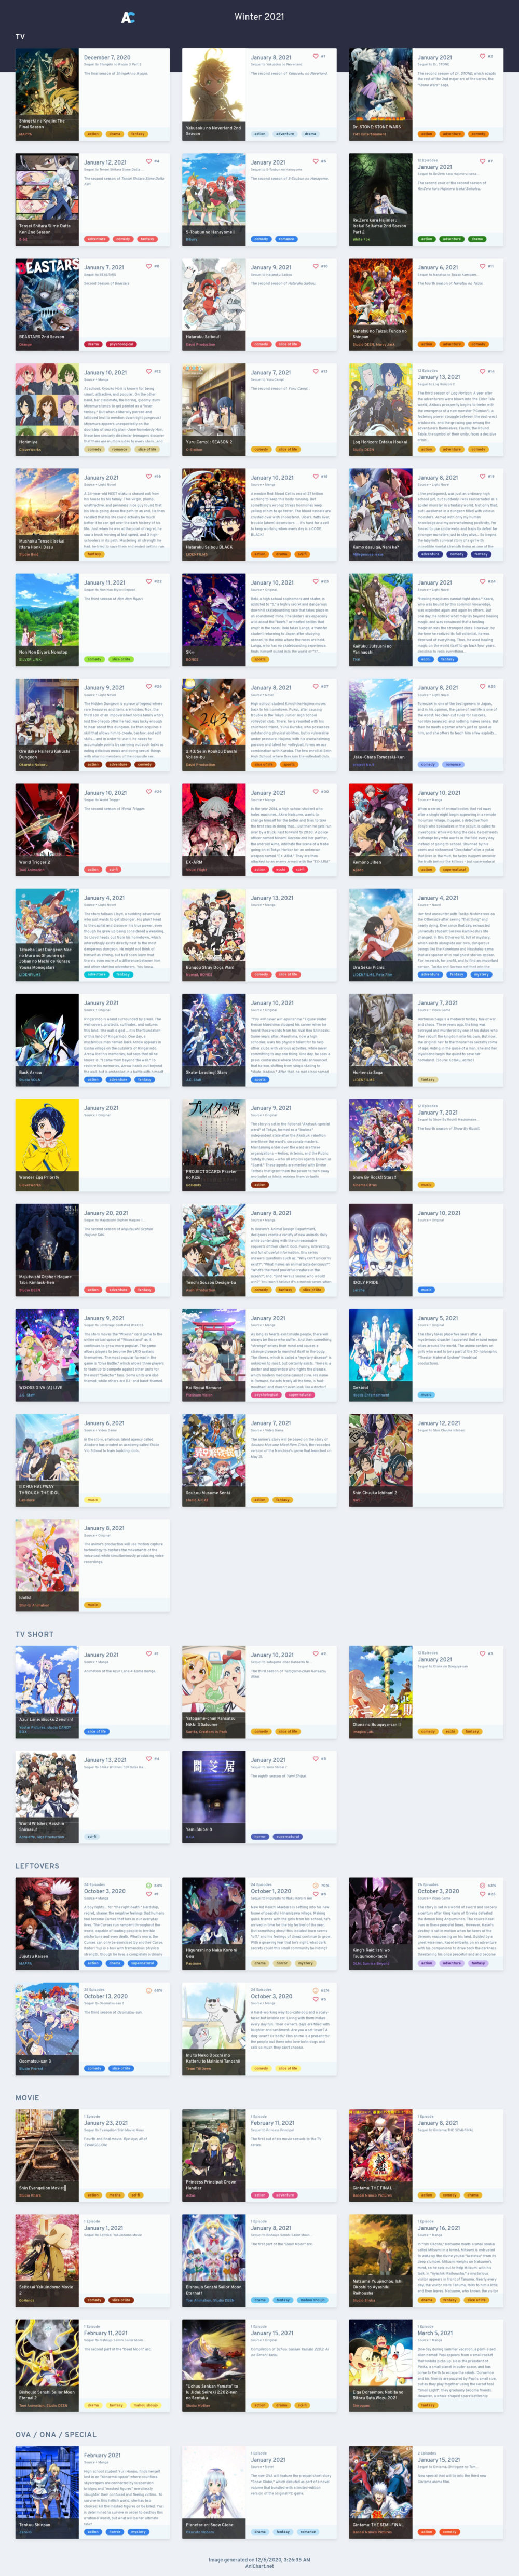 Anime Poster Collage Set, Anime Posters, Anime Wall Collage Kit, Anime Room  Decor, Aesthetic Anime, Polaroid Posters | Size = A6 | QTY = 20